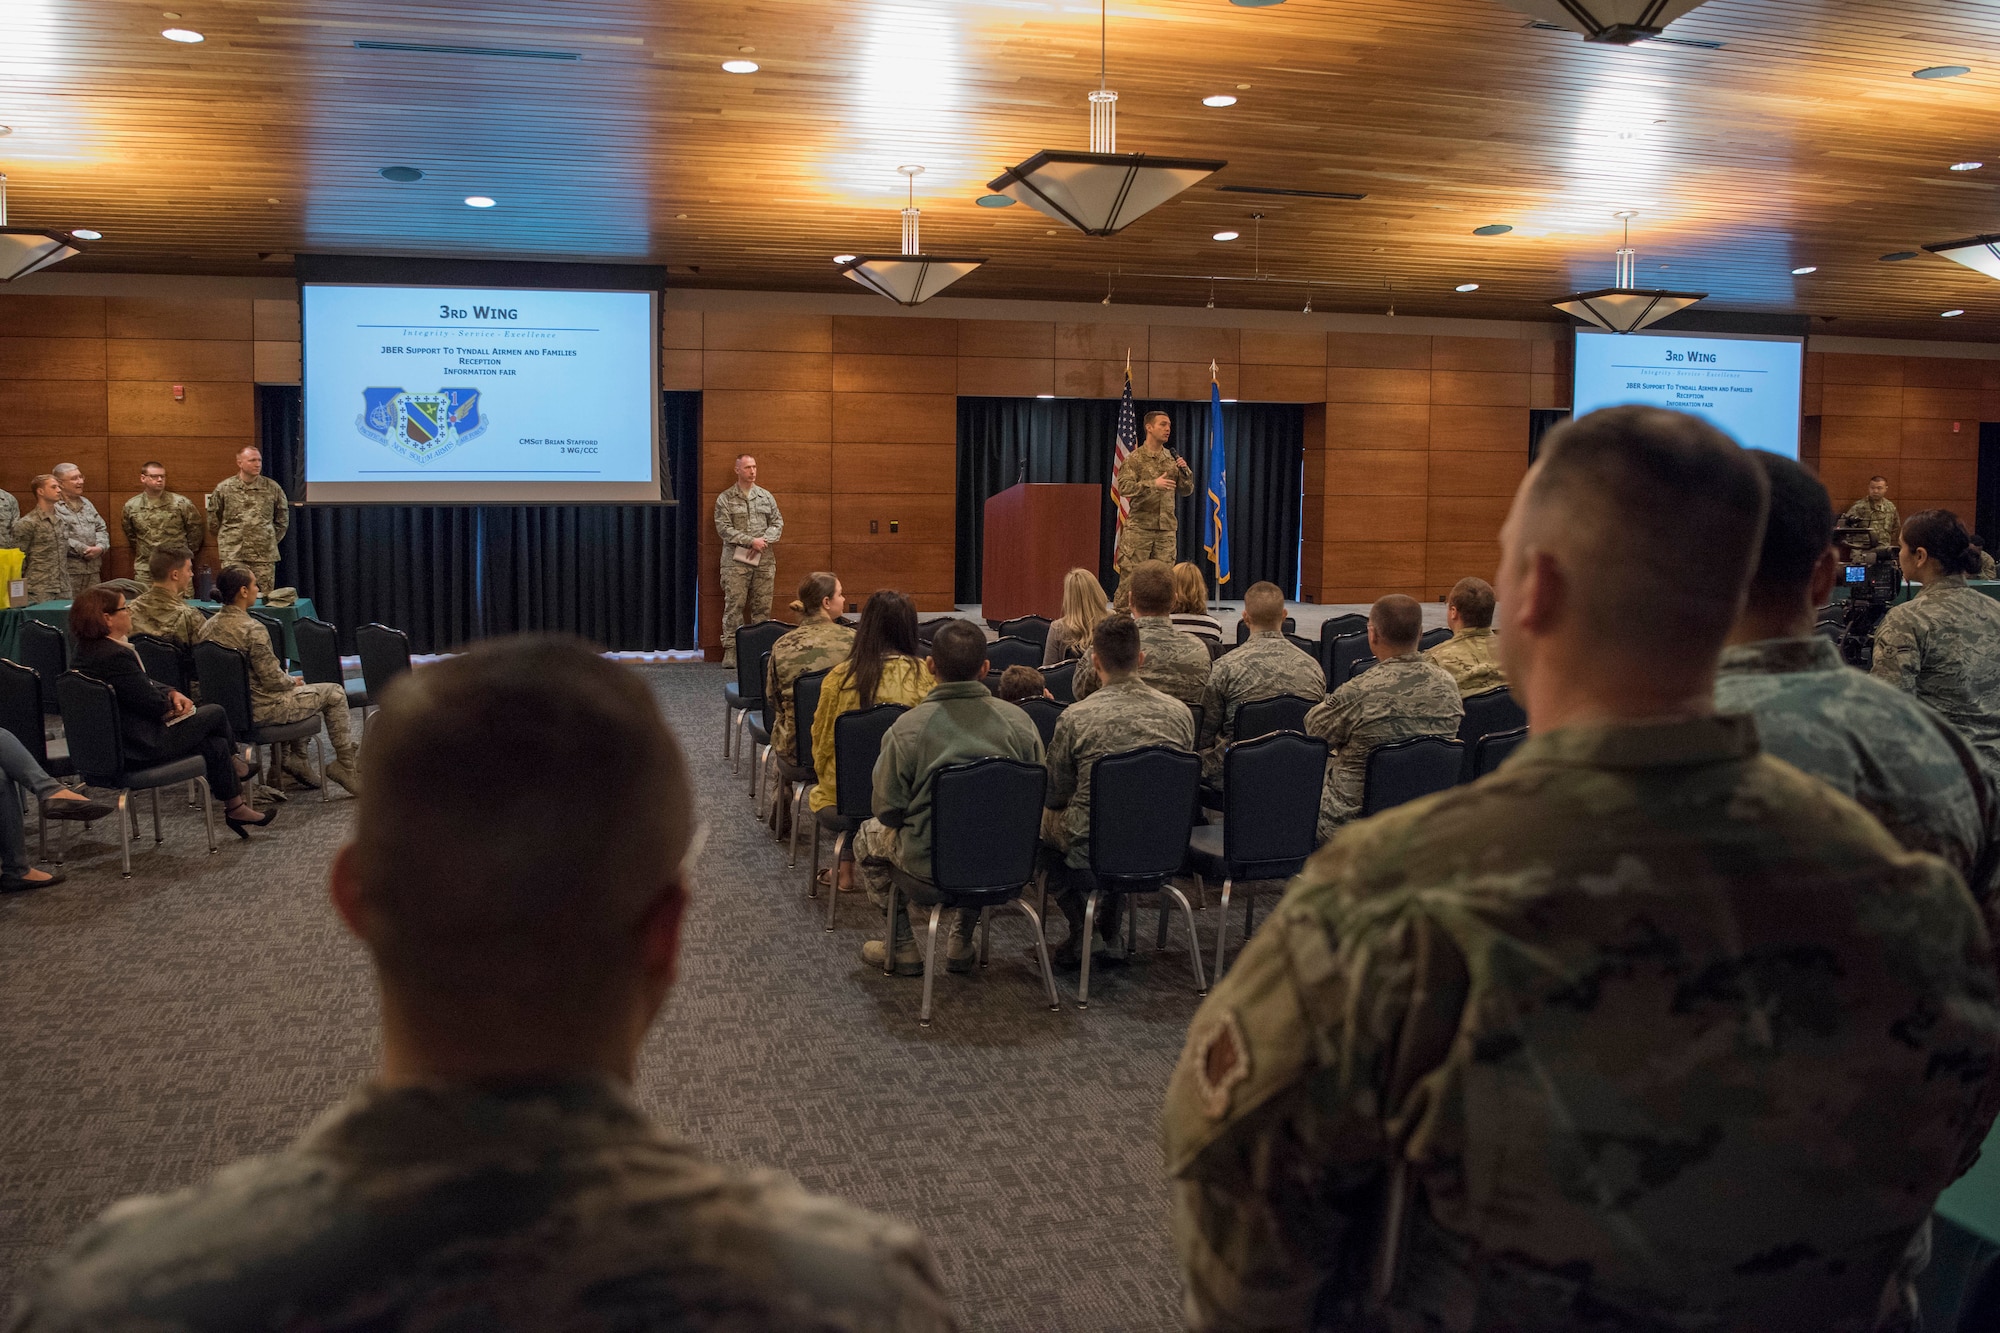 U.S. Air Force Col. Robert D. Davis, 3rd Wing commander, speaks during a welcome reception at Joint Base Elmendorf-Richardson, Alaska, April 8, 2019. The JBER Support to Tyndall Airmen and Families Reception was a one-stop information fair connecting them with the appropriate agencies to address their immediate and specific needs and to learn more about services they offer.